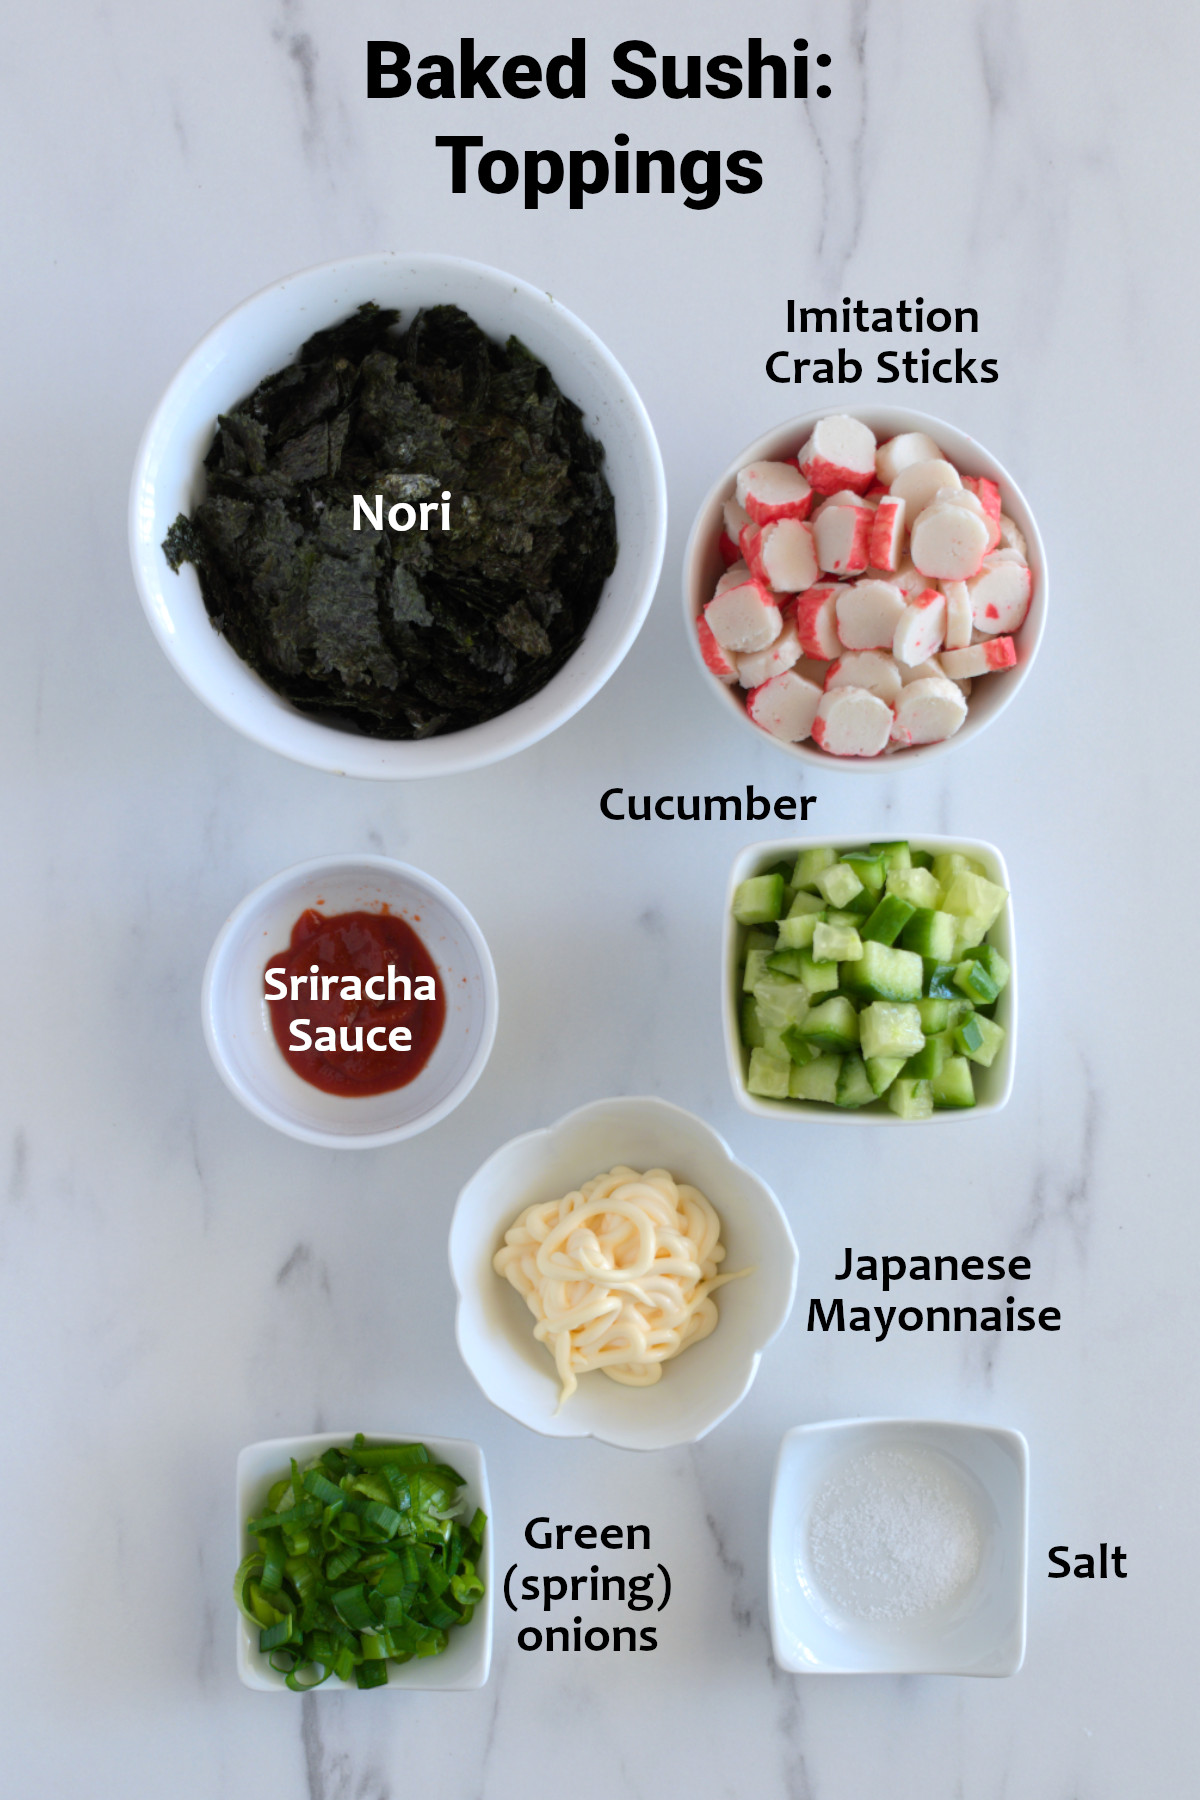 Ingredients for baked sushi topping.